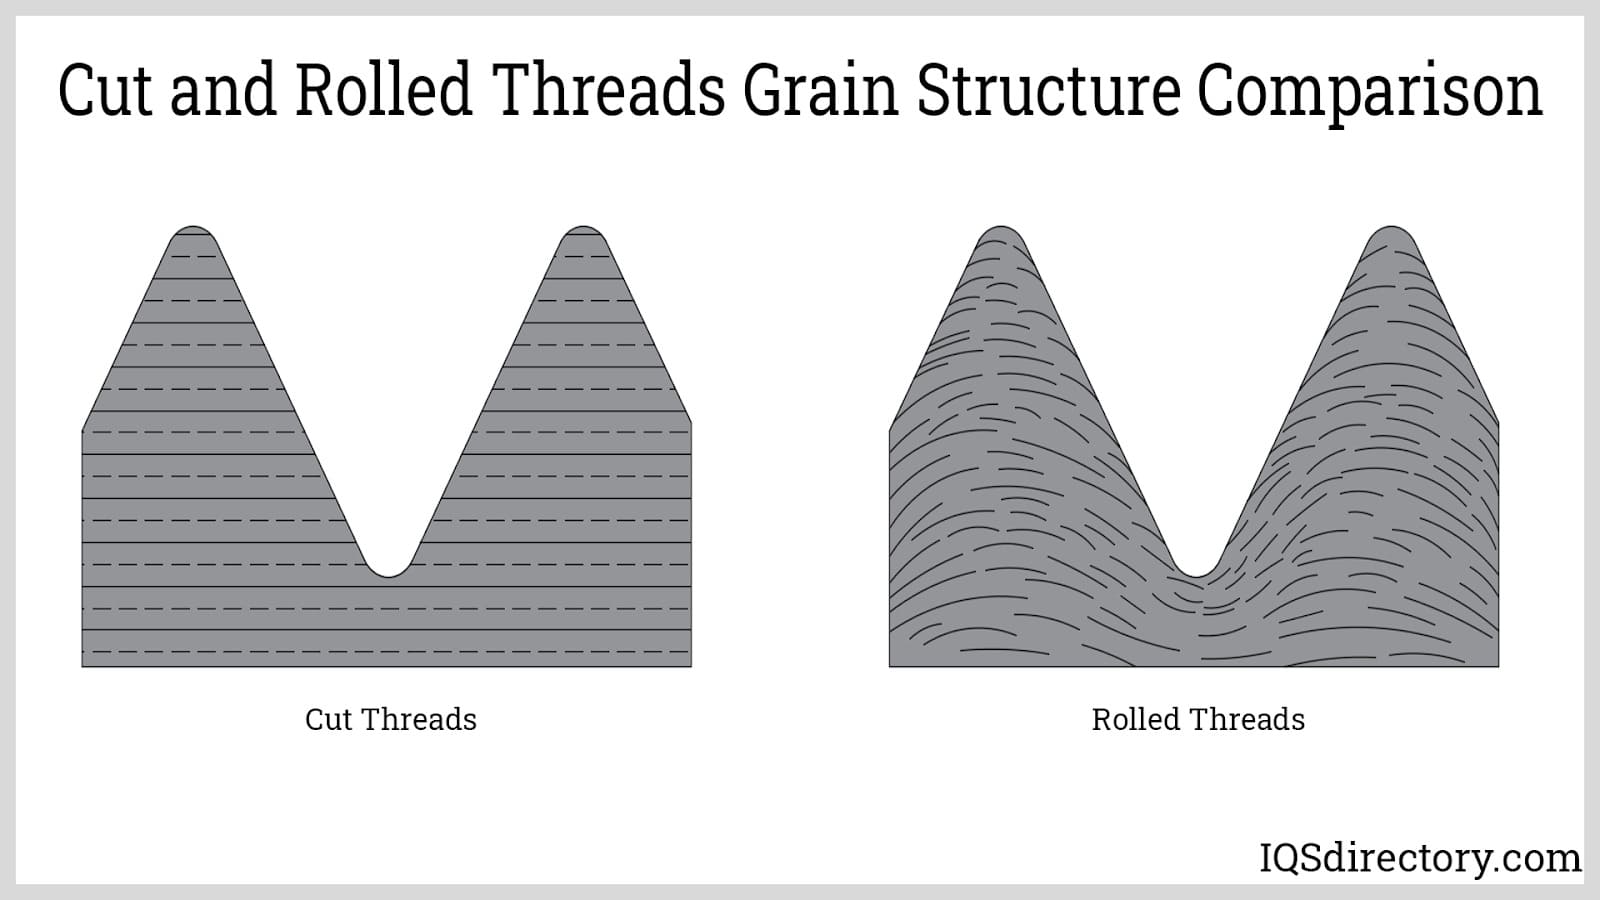 Cut and Rolled Threads Grain Structure Comparison